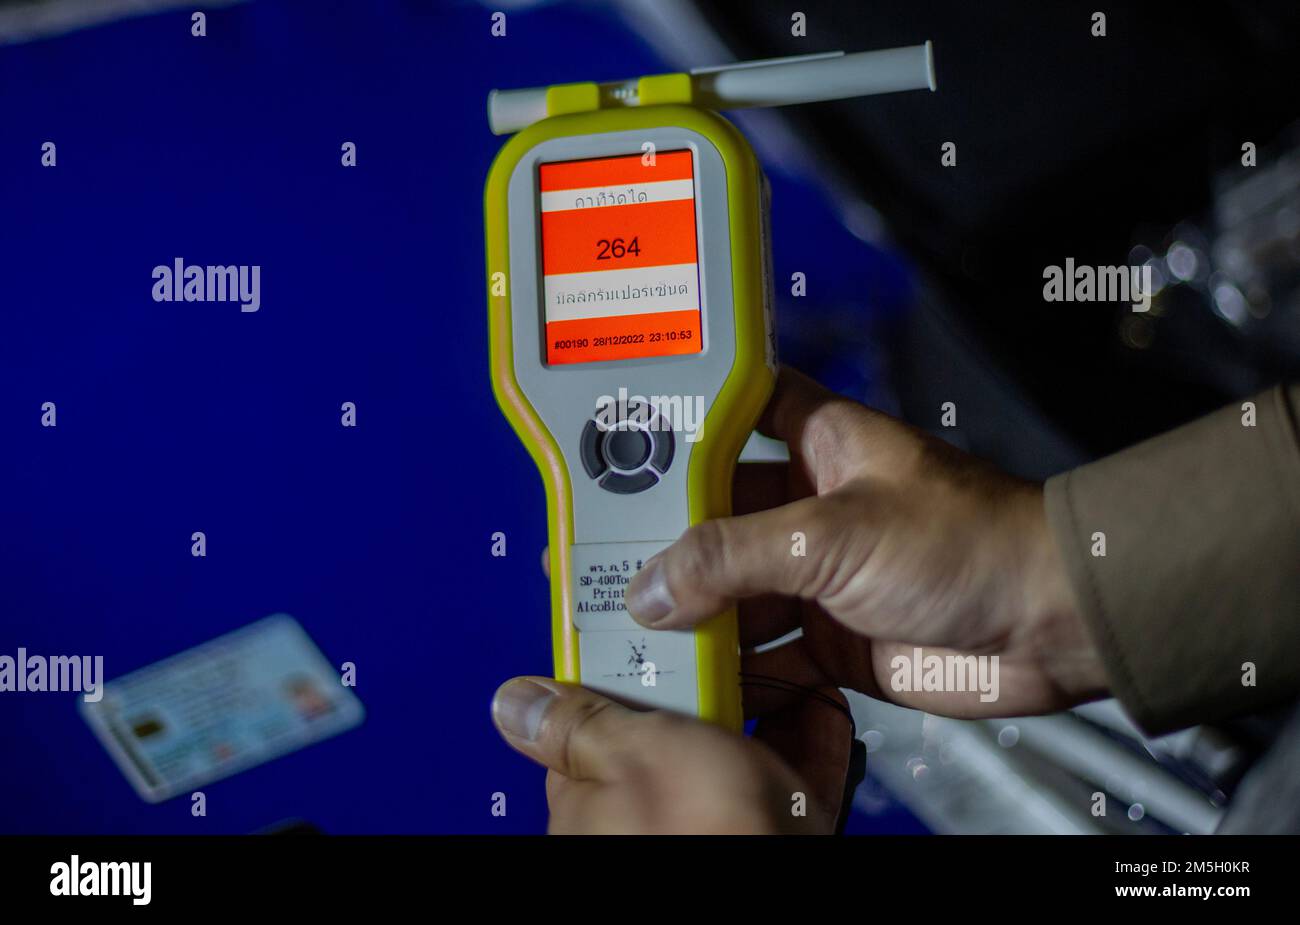 A Thai police officer shows the breathalyzer with a higher than normal for alcohol tests at Check point in Chiang Mai. The Center for Prevention and Reduction of Road Accidents has been established during the New Year's Festival 2023, the 7-day intensive control period from 29 December 2022 to 4 January 2023. More than 50,000 police officers are to set up checkpoints to facilitate traffic laws and take care of the safety of people. They will work throughout the festival without holidays, focusing on 4 charges according to government policy: driving while intoxicated, driving too fast, and not Stock Photo